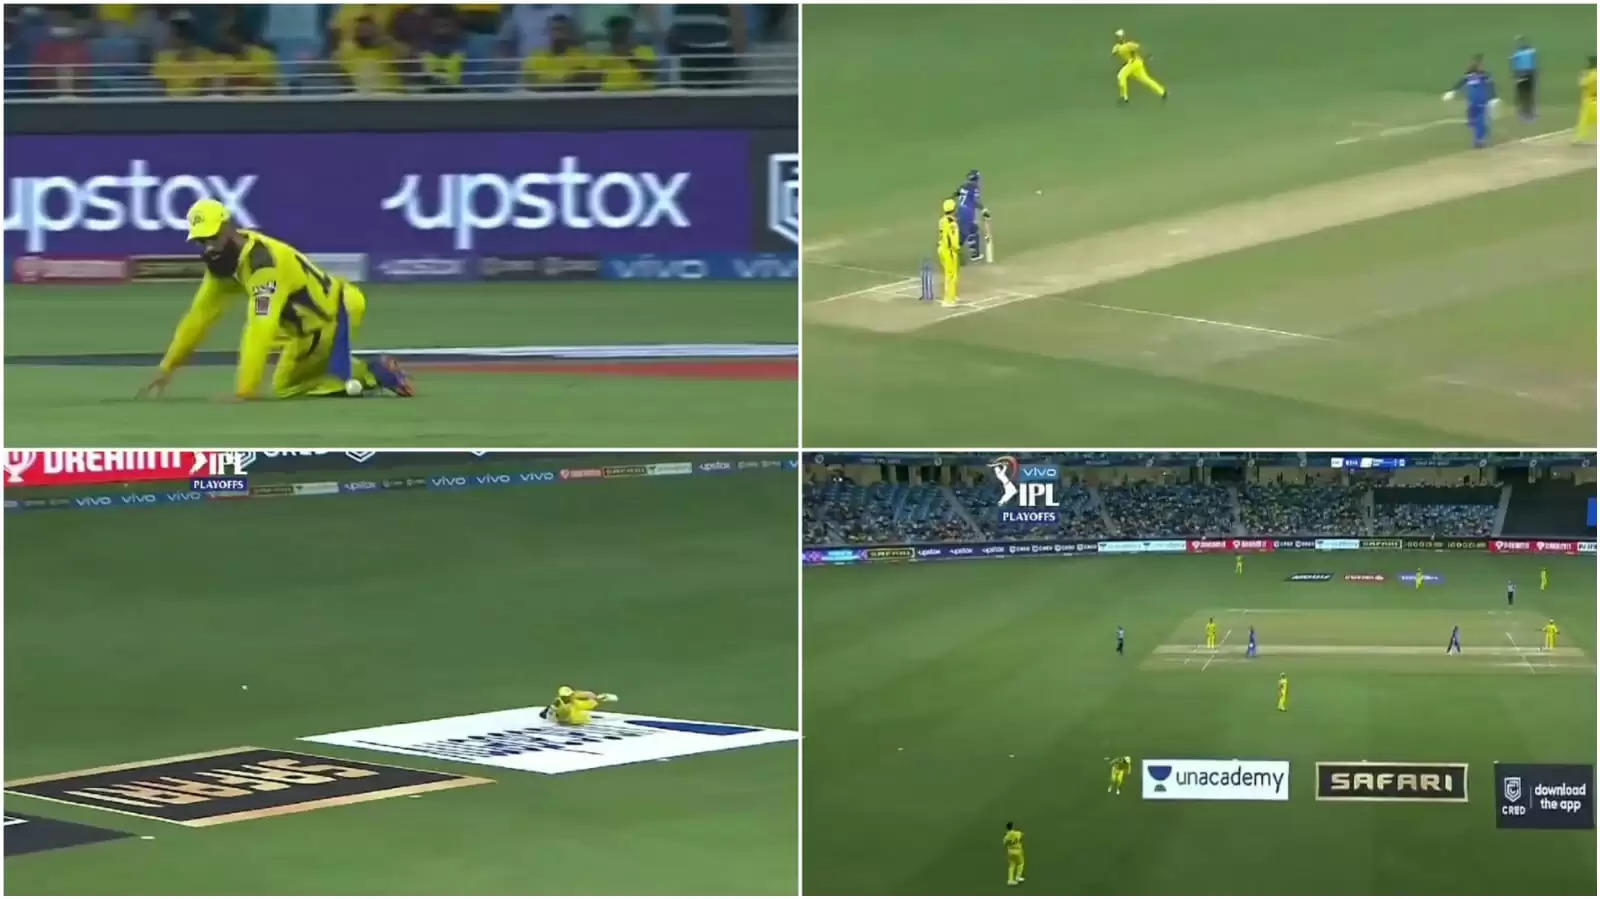 WATCH: Comedy of errors in the qualifier as CSK fielders throw the ball around